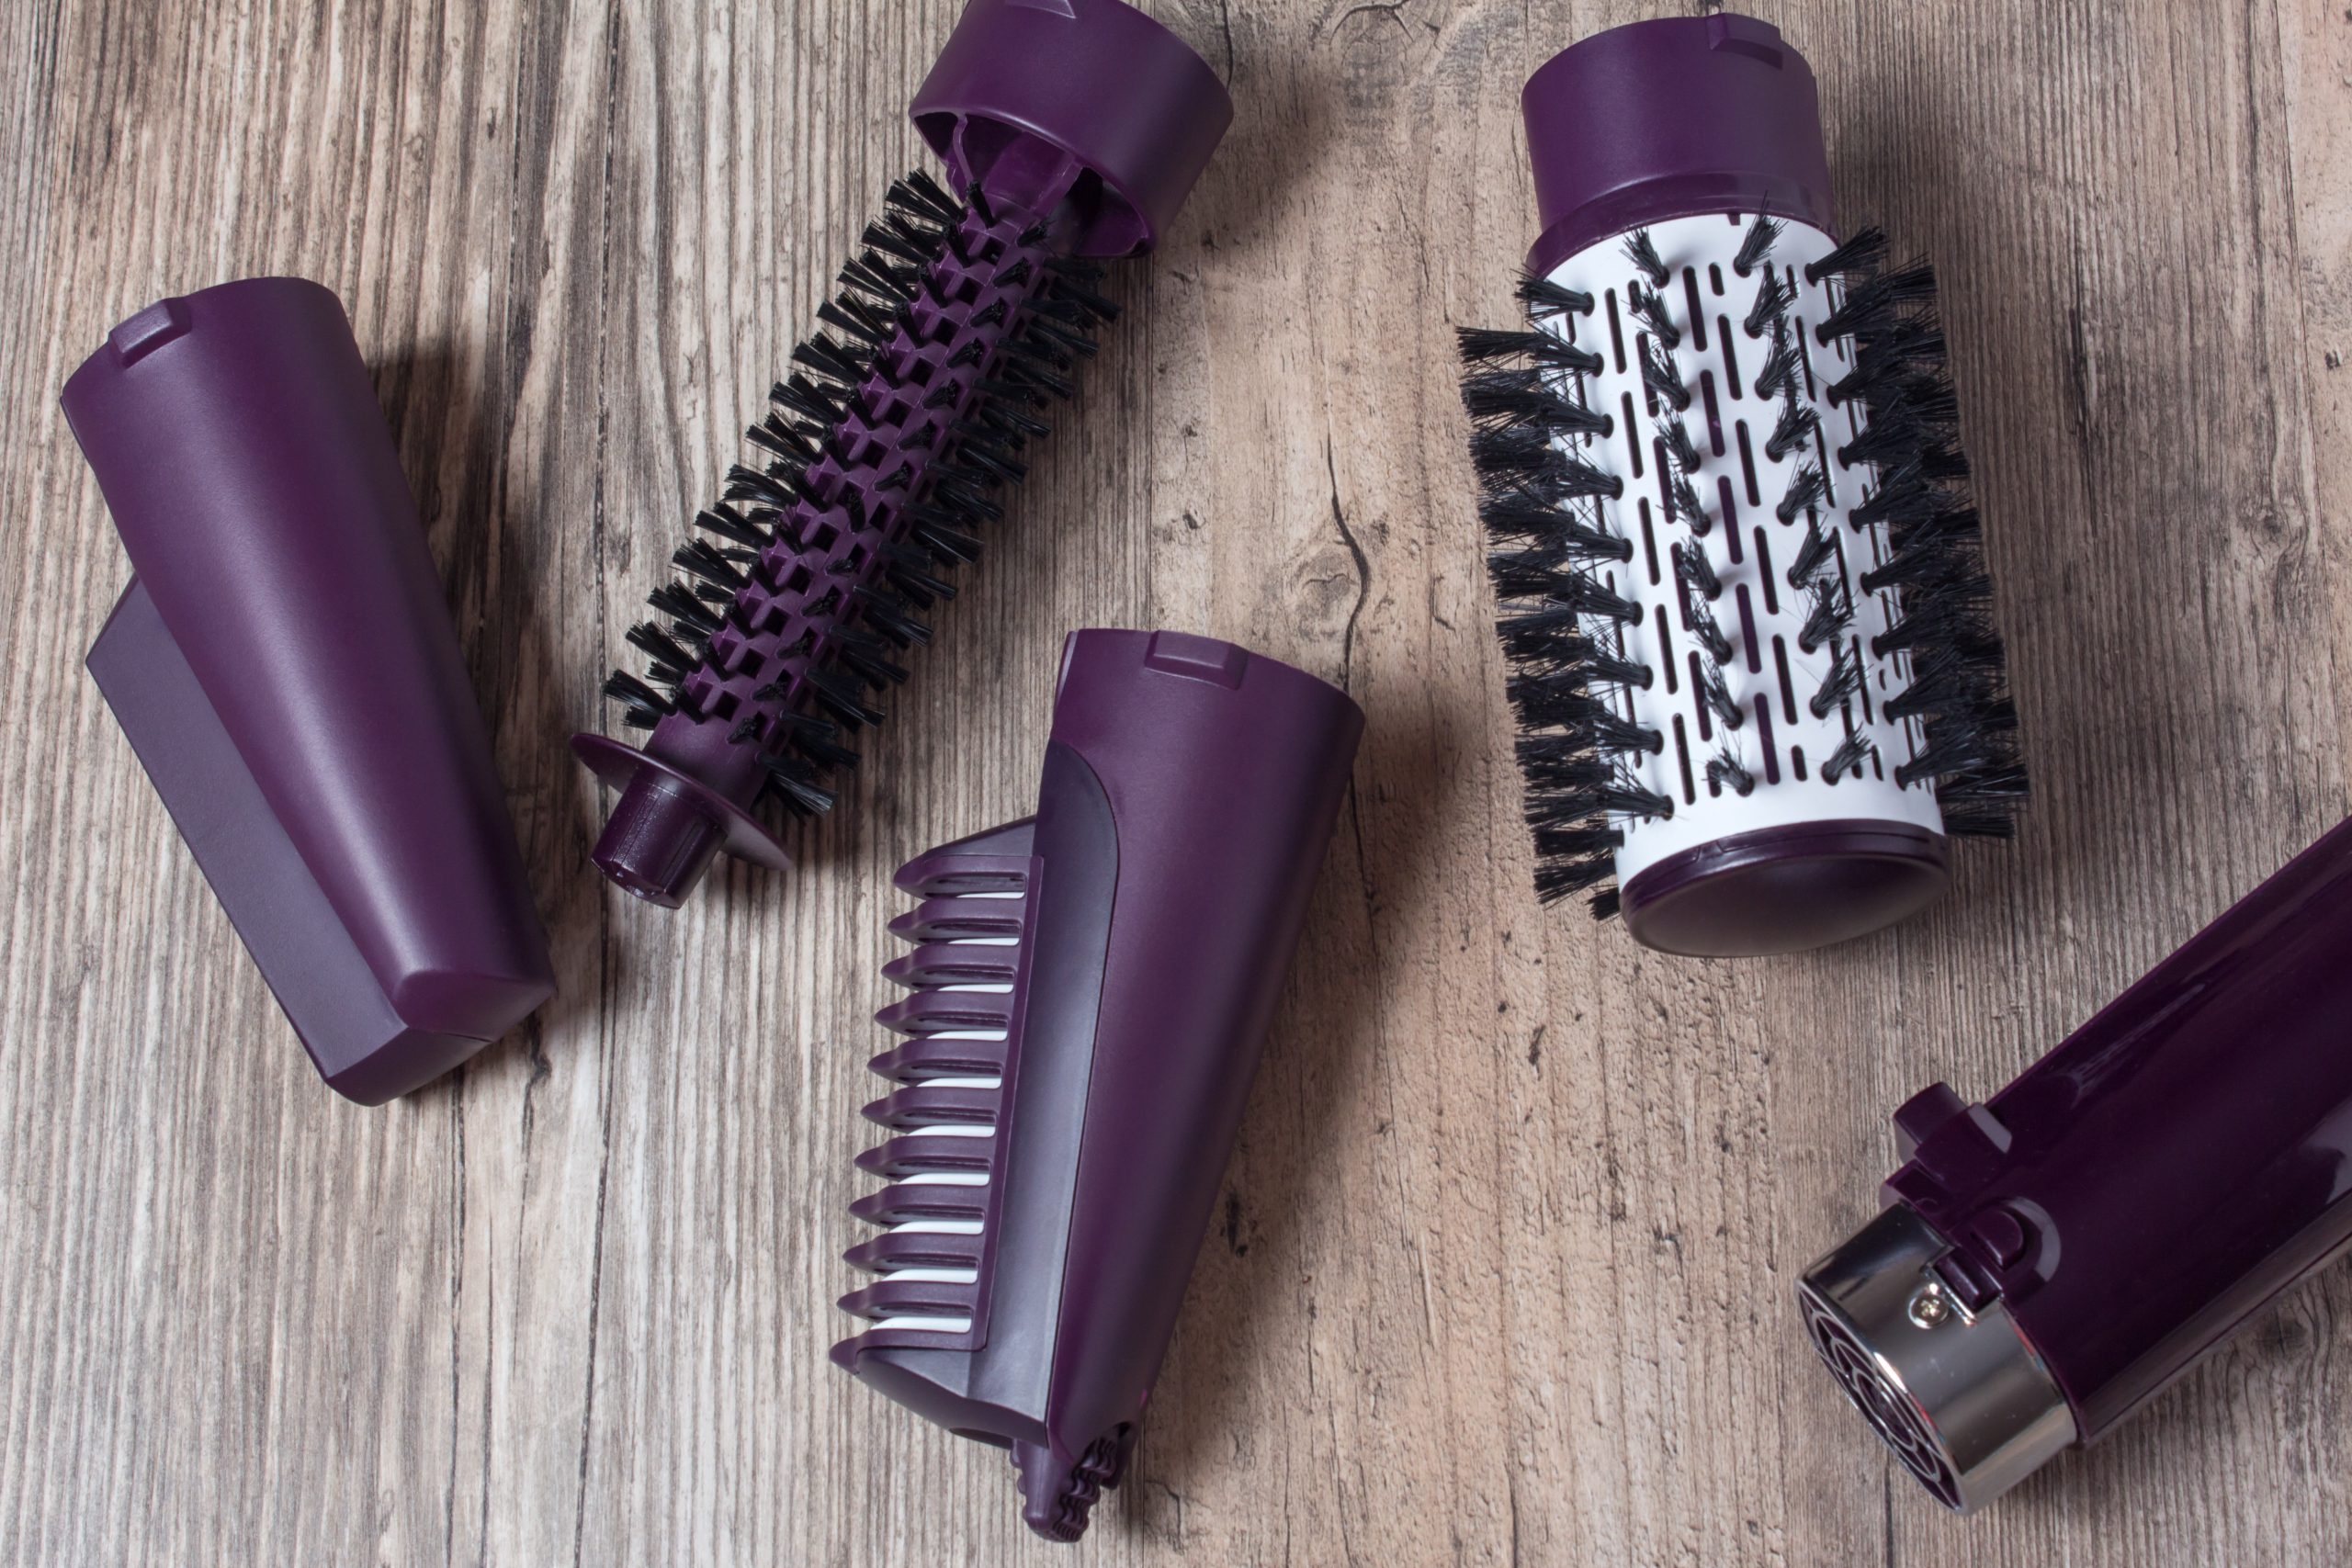 The Best Hair Dryer With Comb | Reviews, Ratings, Comparisons